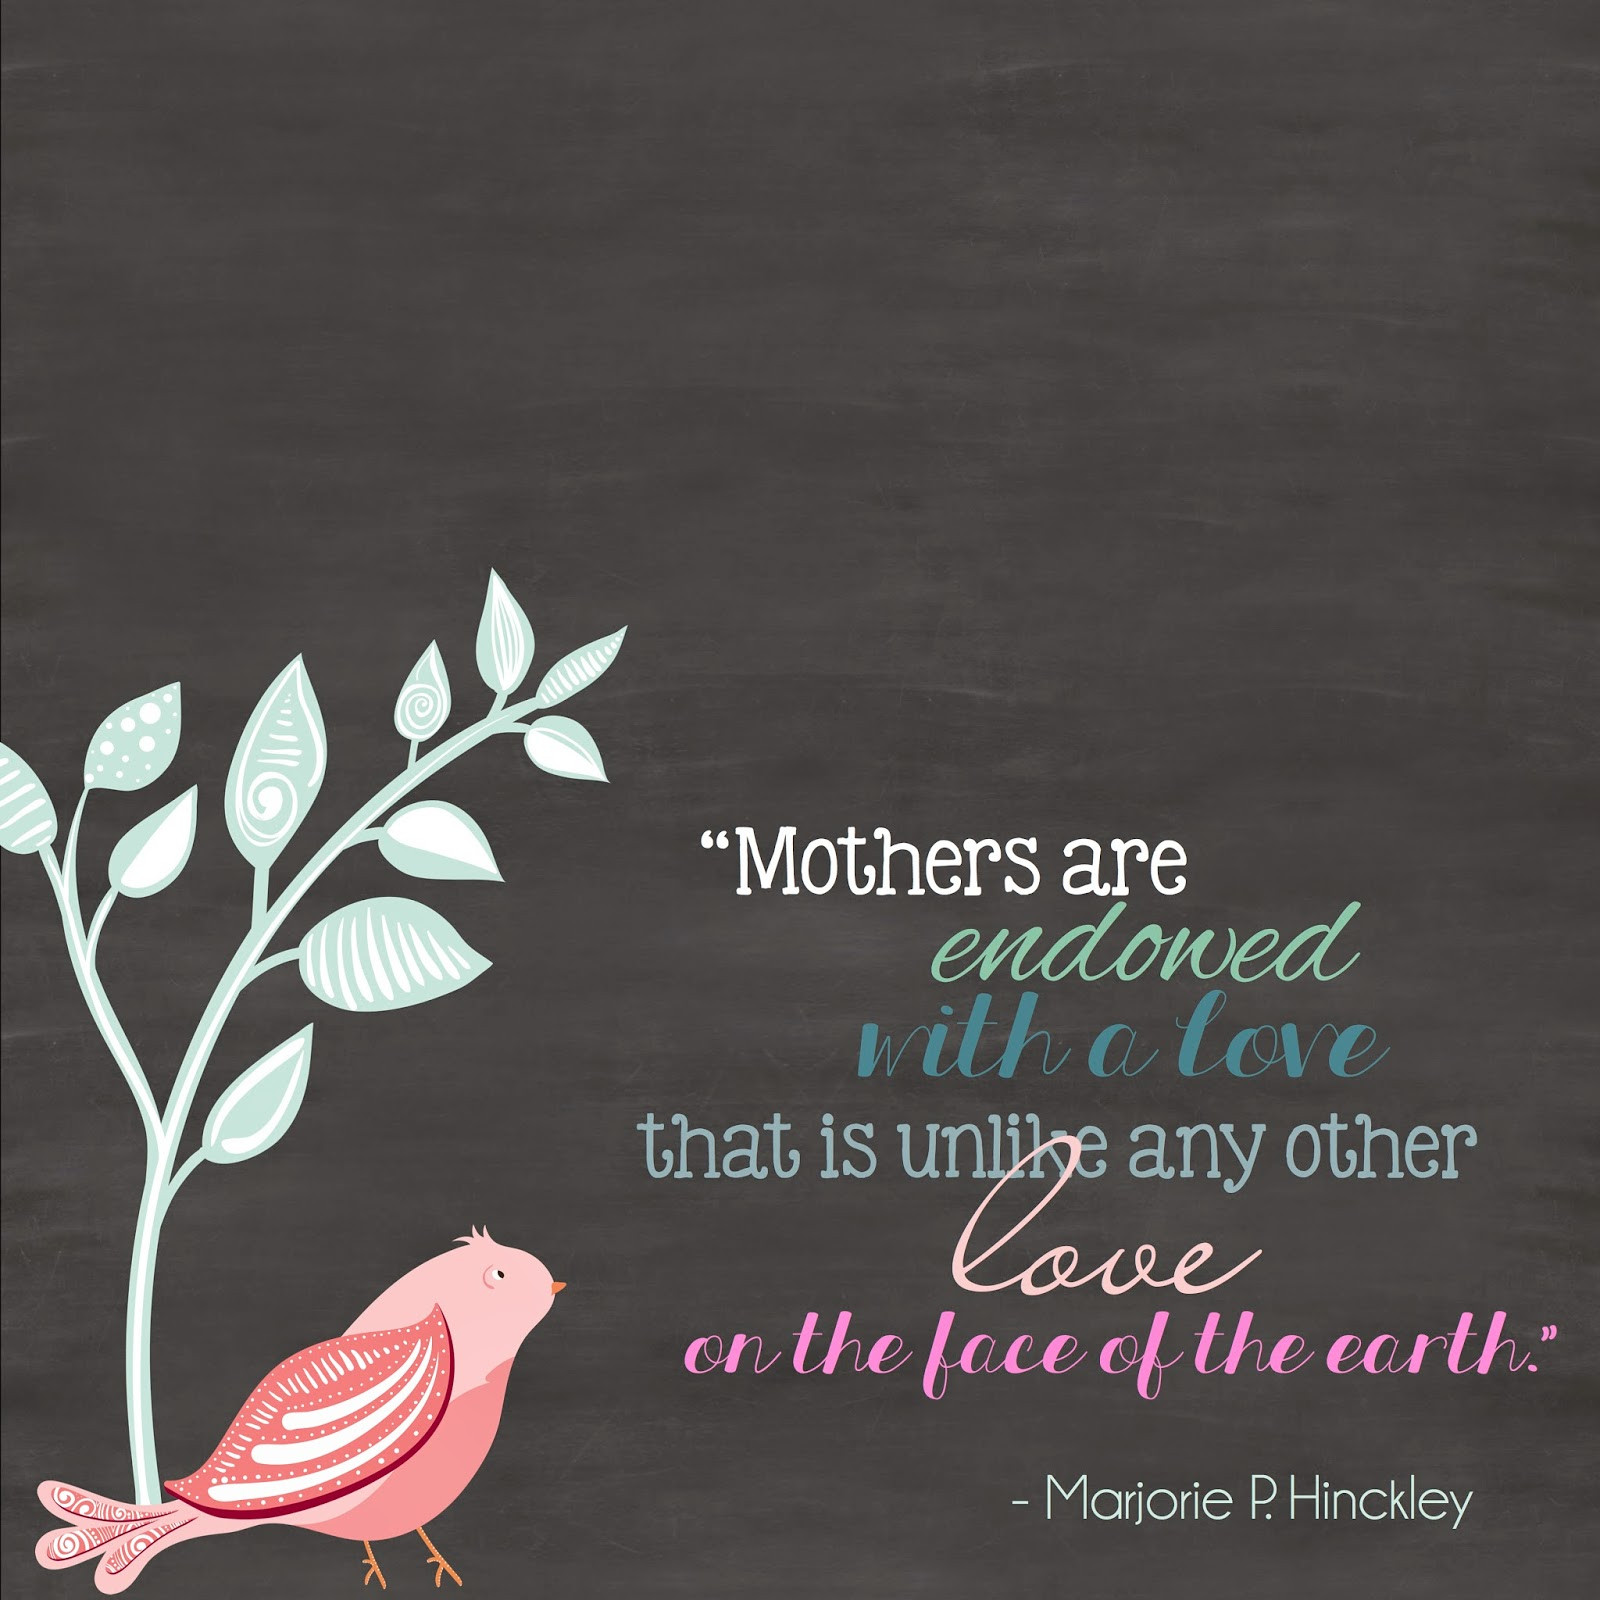 Quotes Motherhood
 Mormon Mom Planners Monthly Planner Weekly Planner May 2014